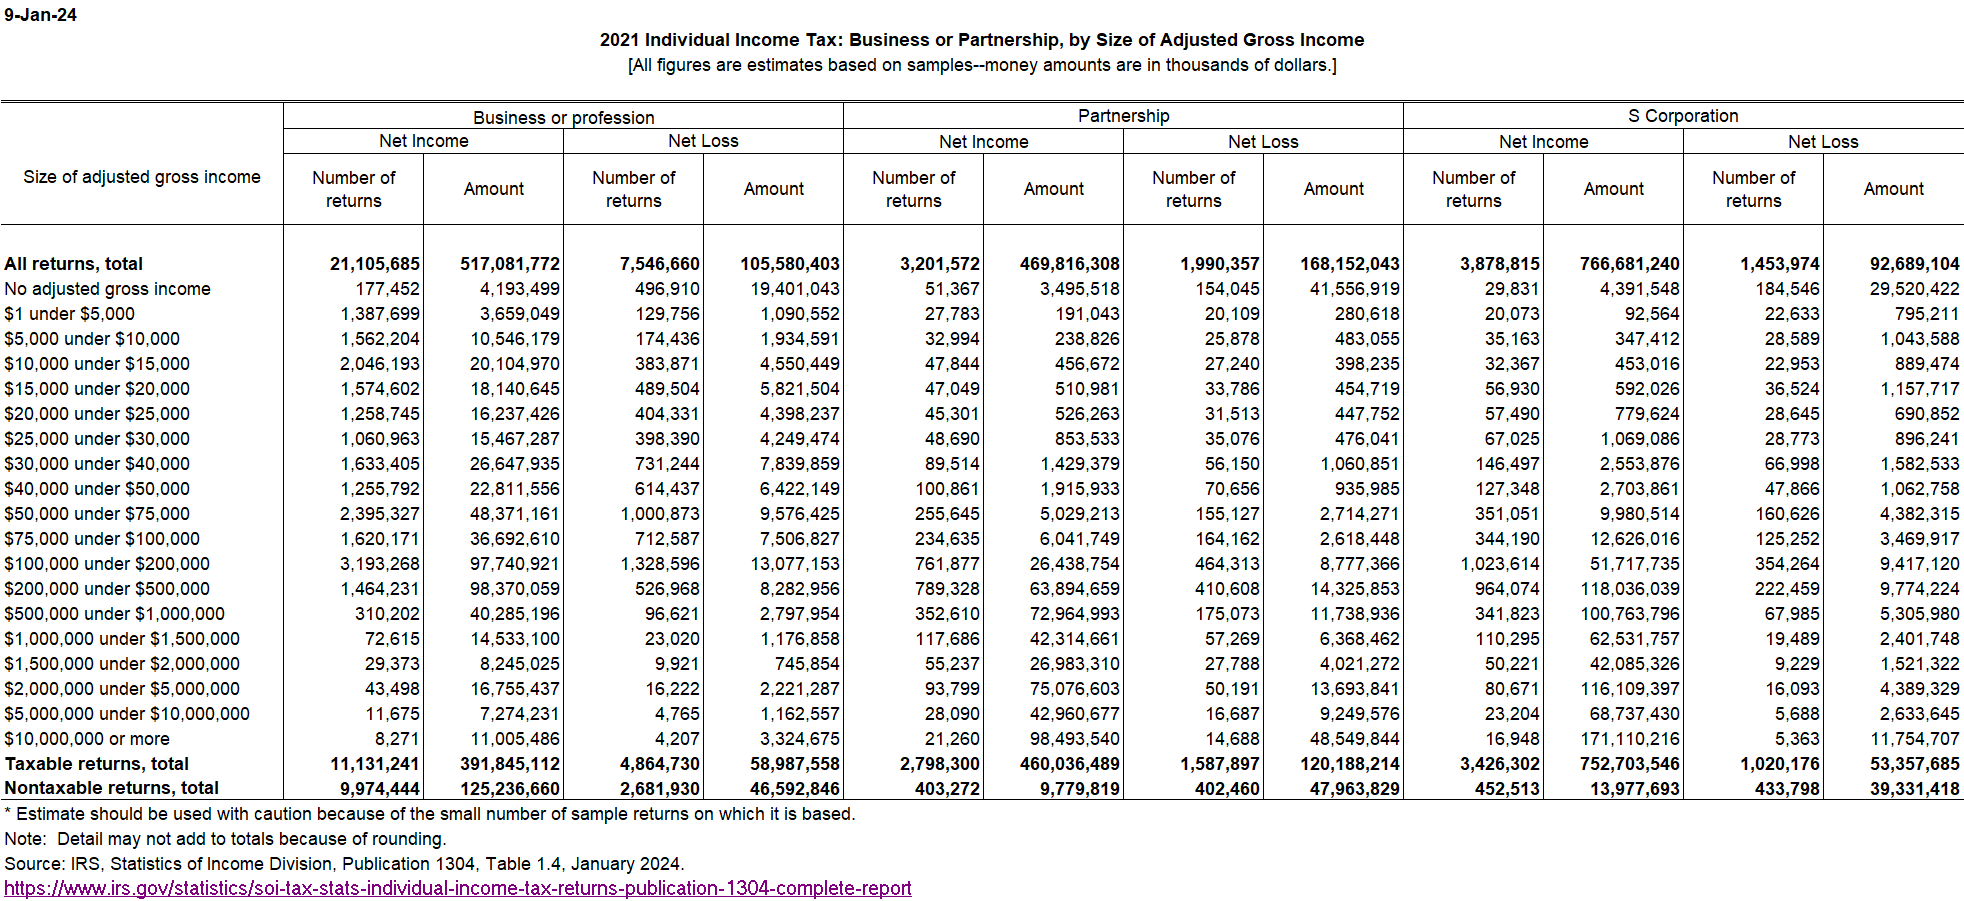 2021 Individual Income Tax: Business or Partnership, by Size of Adjusted Gross Income